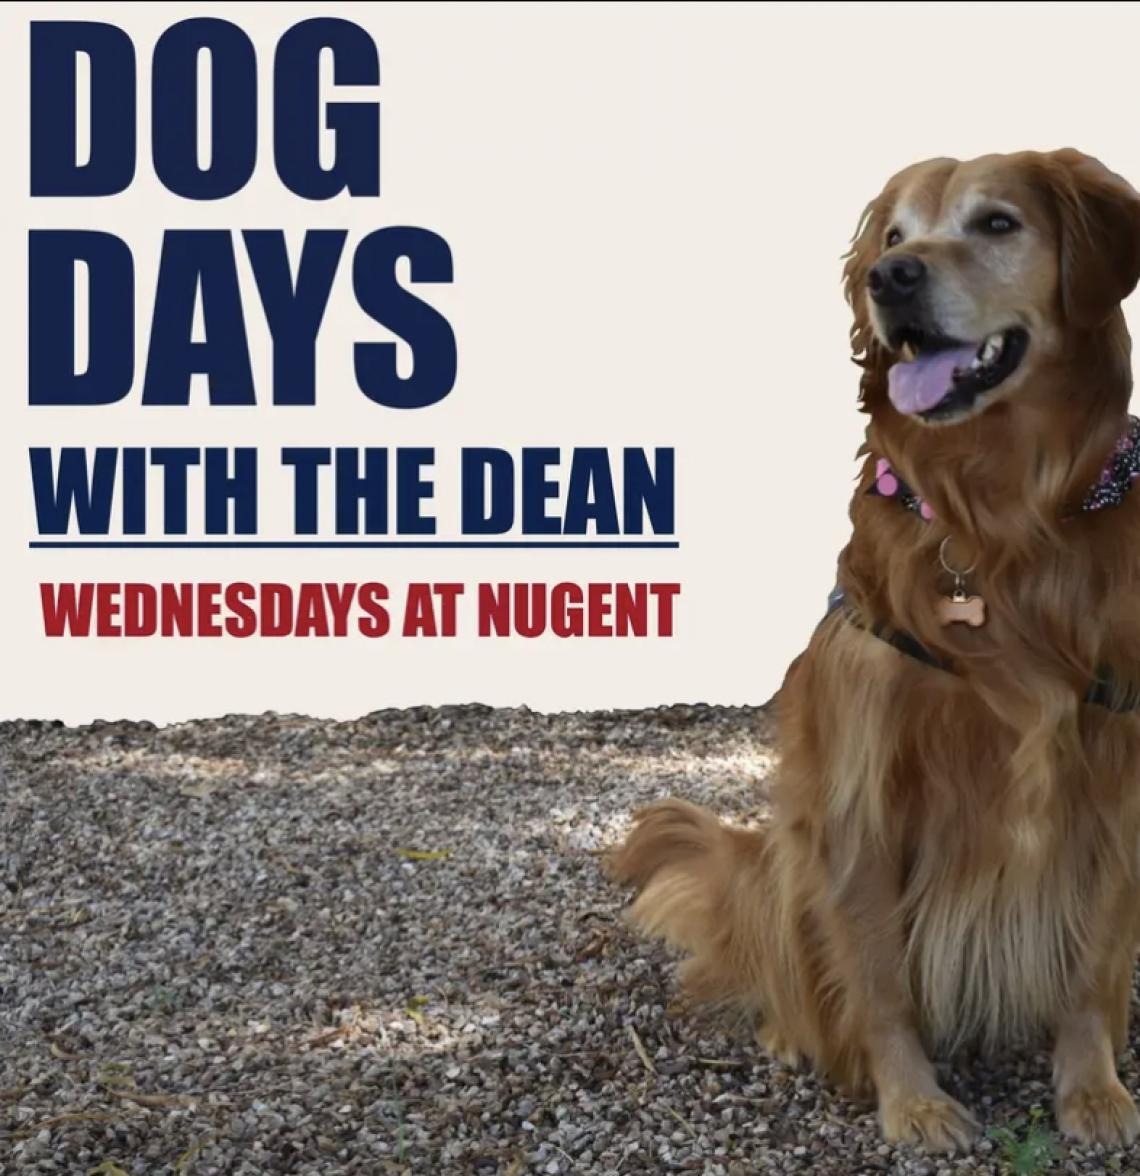 Dog Days with the Dean, Wednesdays at Nugent